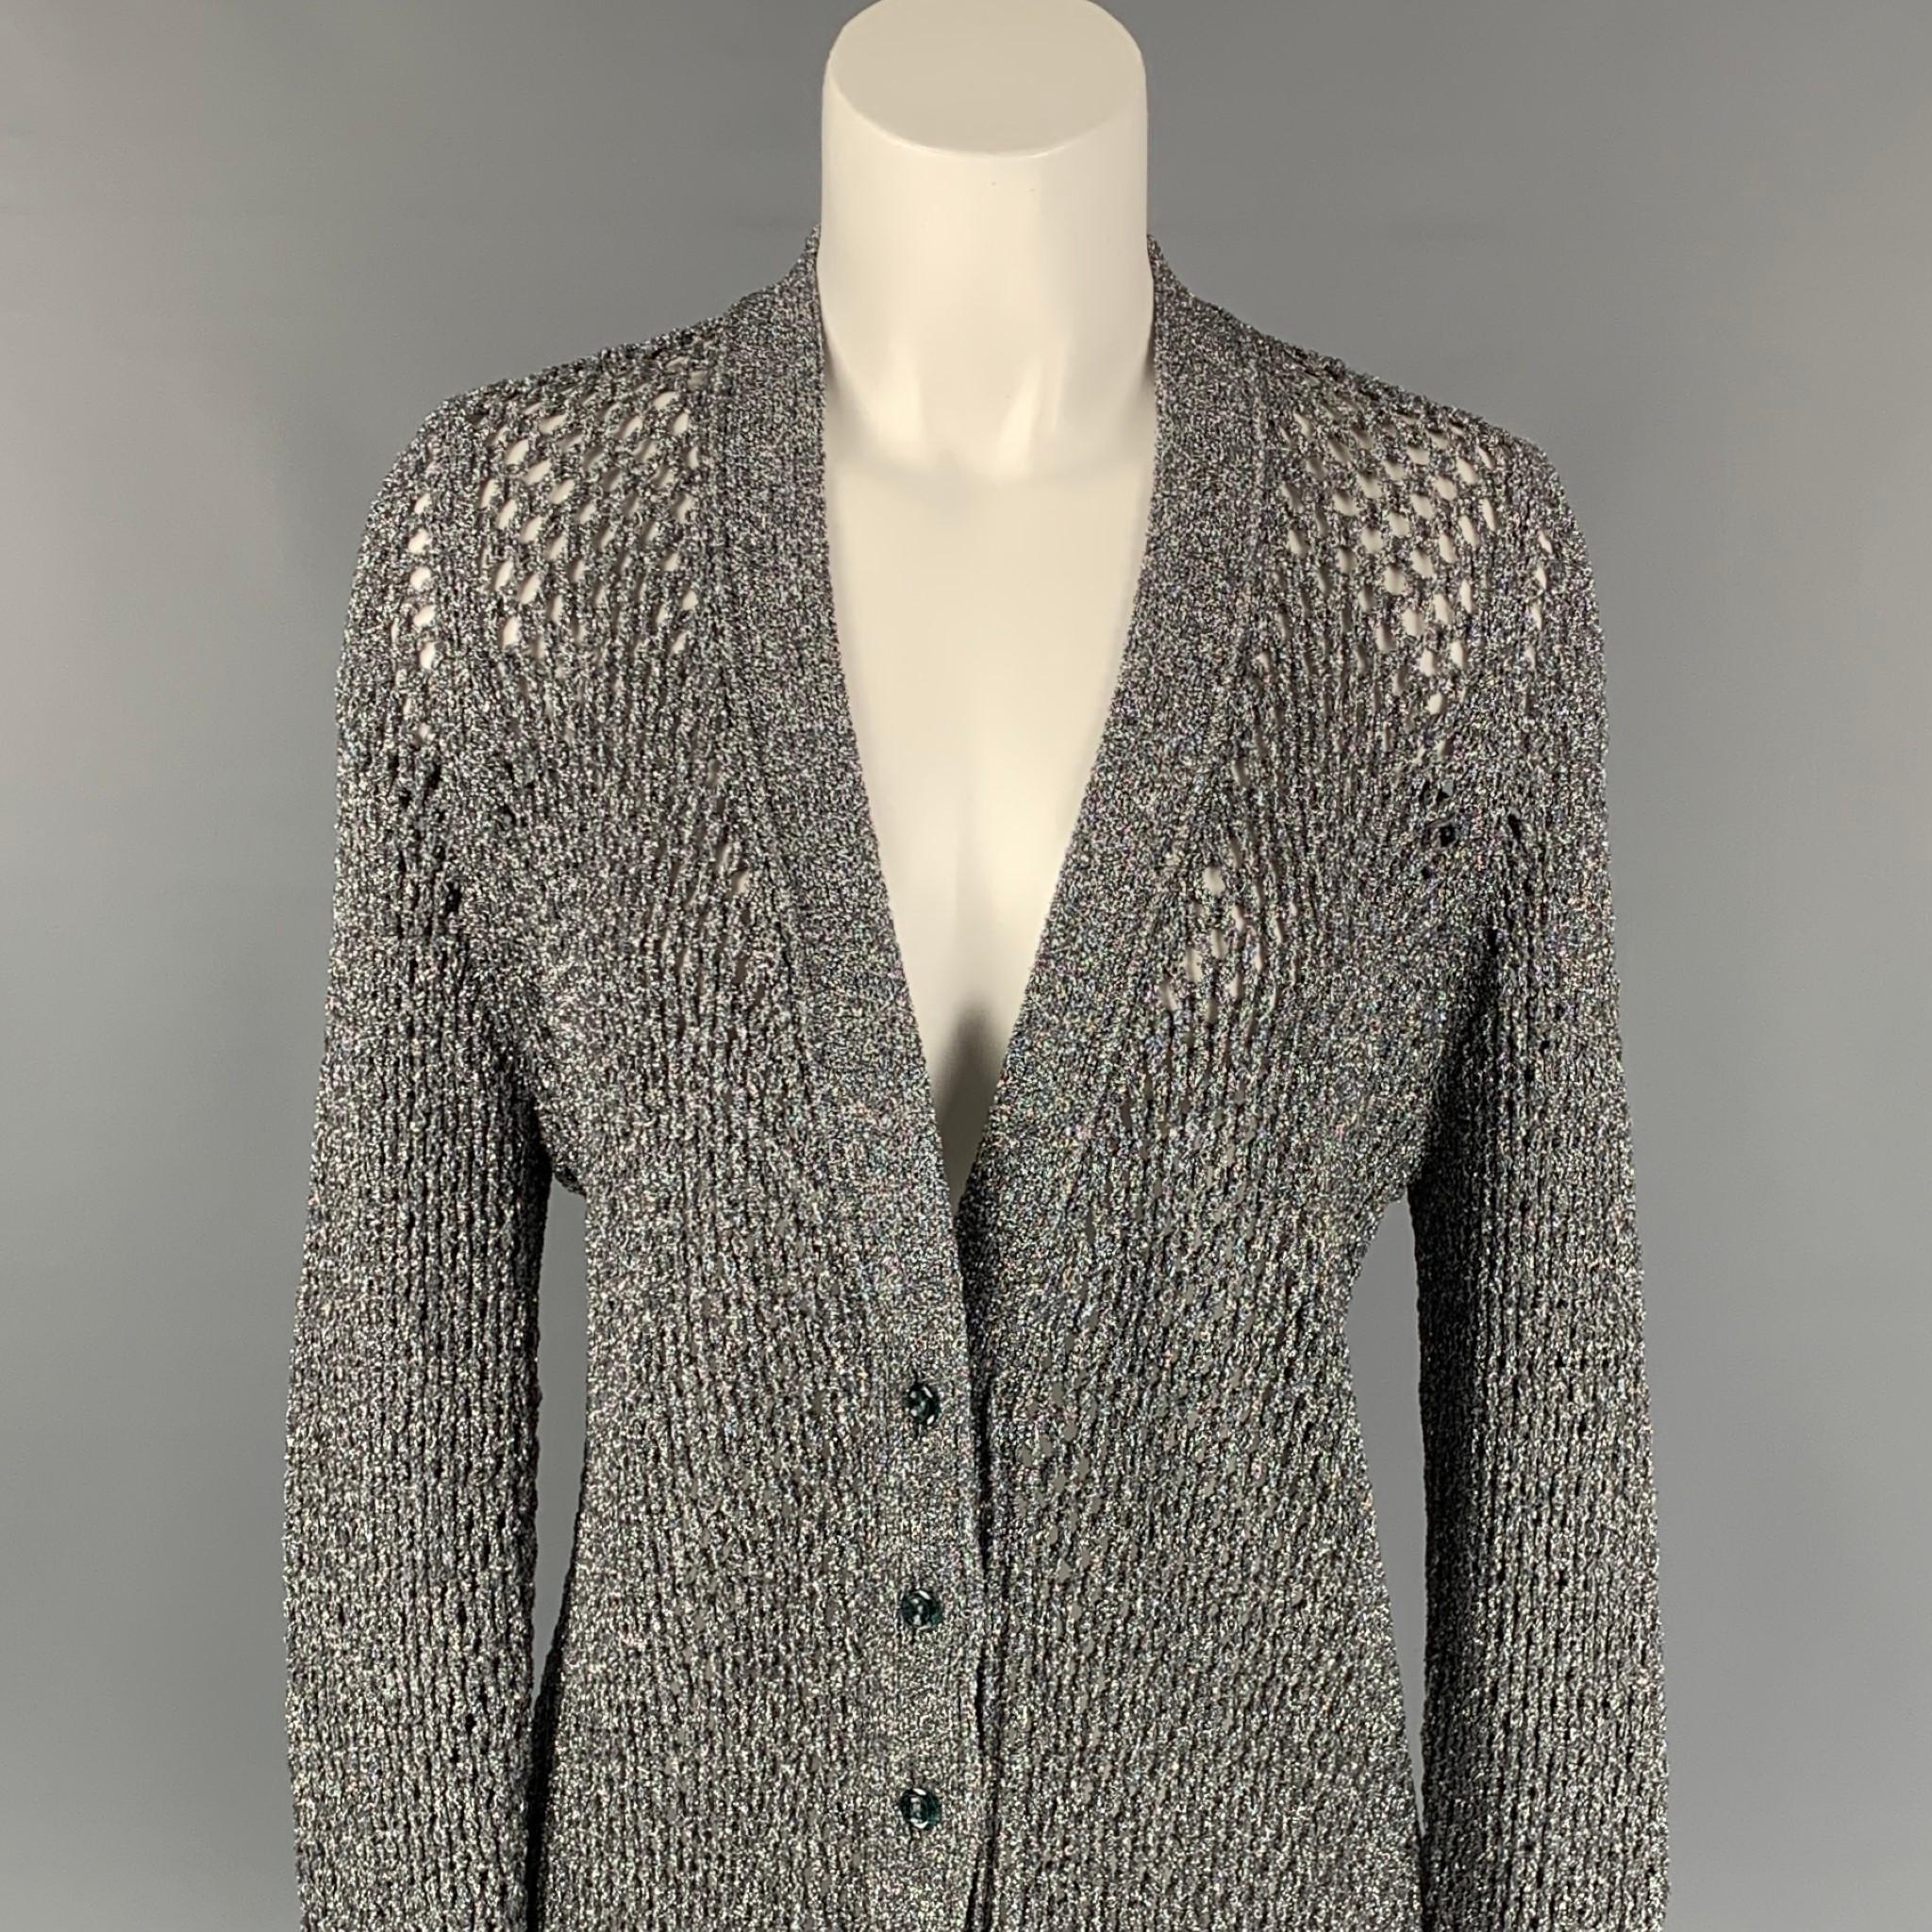 MARC JACOBS 2018 cardigan comes in a silver metallic knitted nylon, front pockets, and a buttoned closure. Made in Italy. 

Very Good Pre-Owned Condition.
Marked: M

Measurements:

Shoulder: 14.5 in.
Bust: 36 in.
Sleeve: 31 in.
Length: 33 in. 